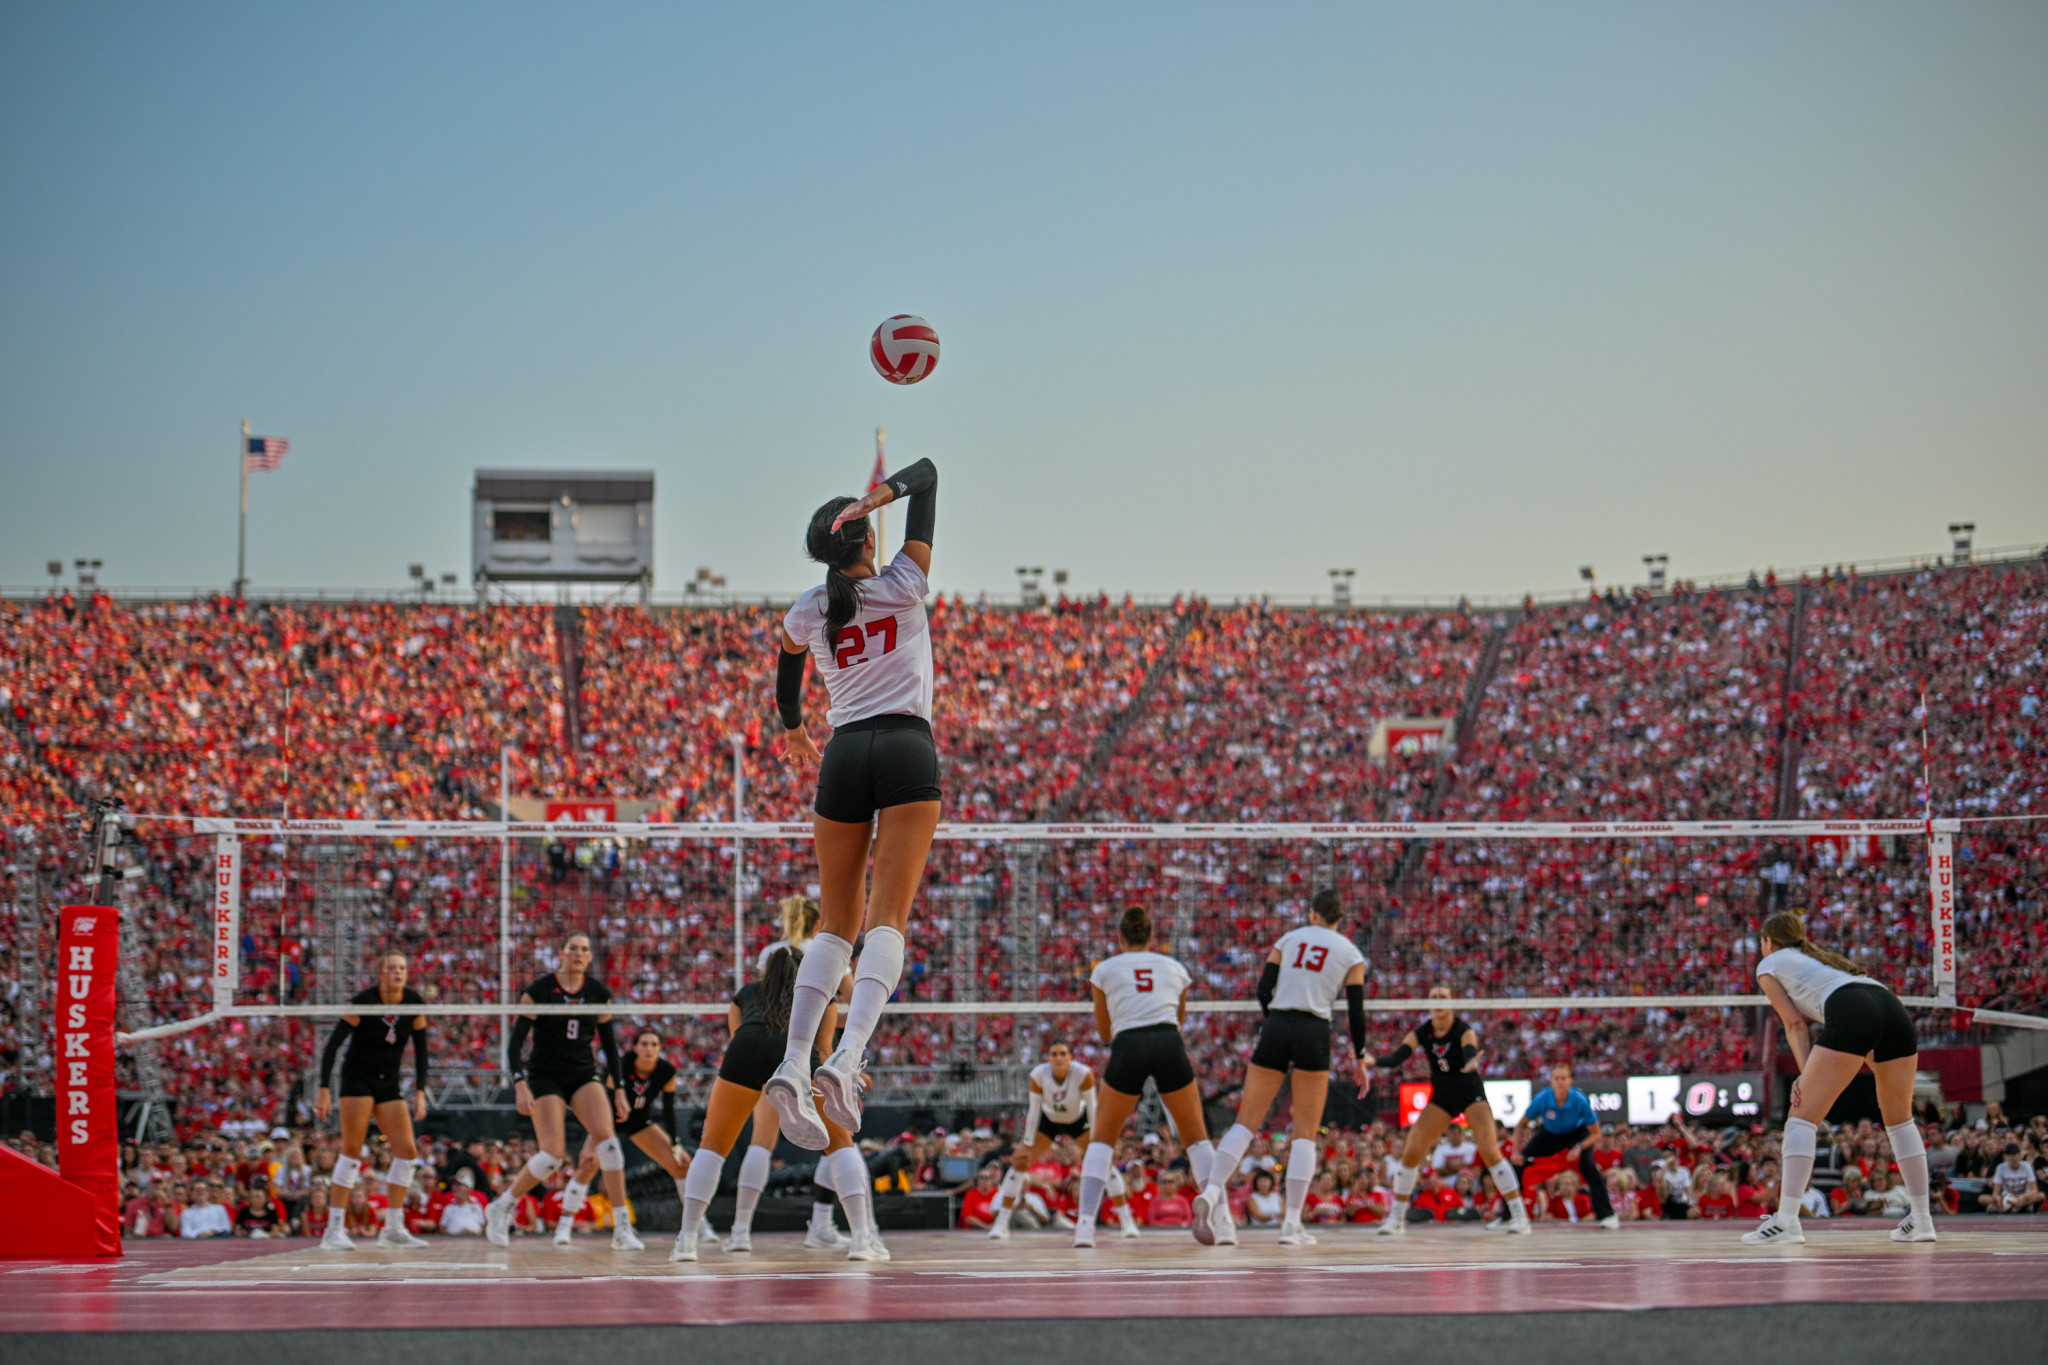 The University of Nebraska's Volleyball Day saw a world record set for attendance at a one-day women's sport event ©Getty Images